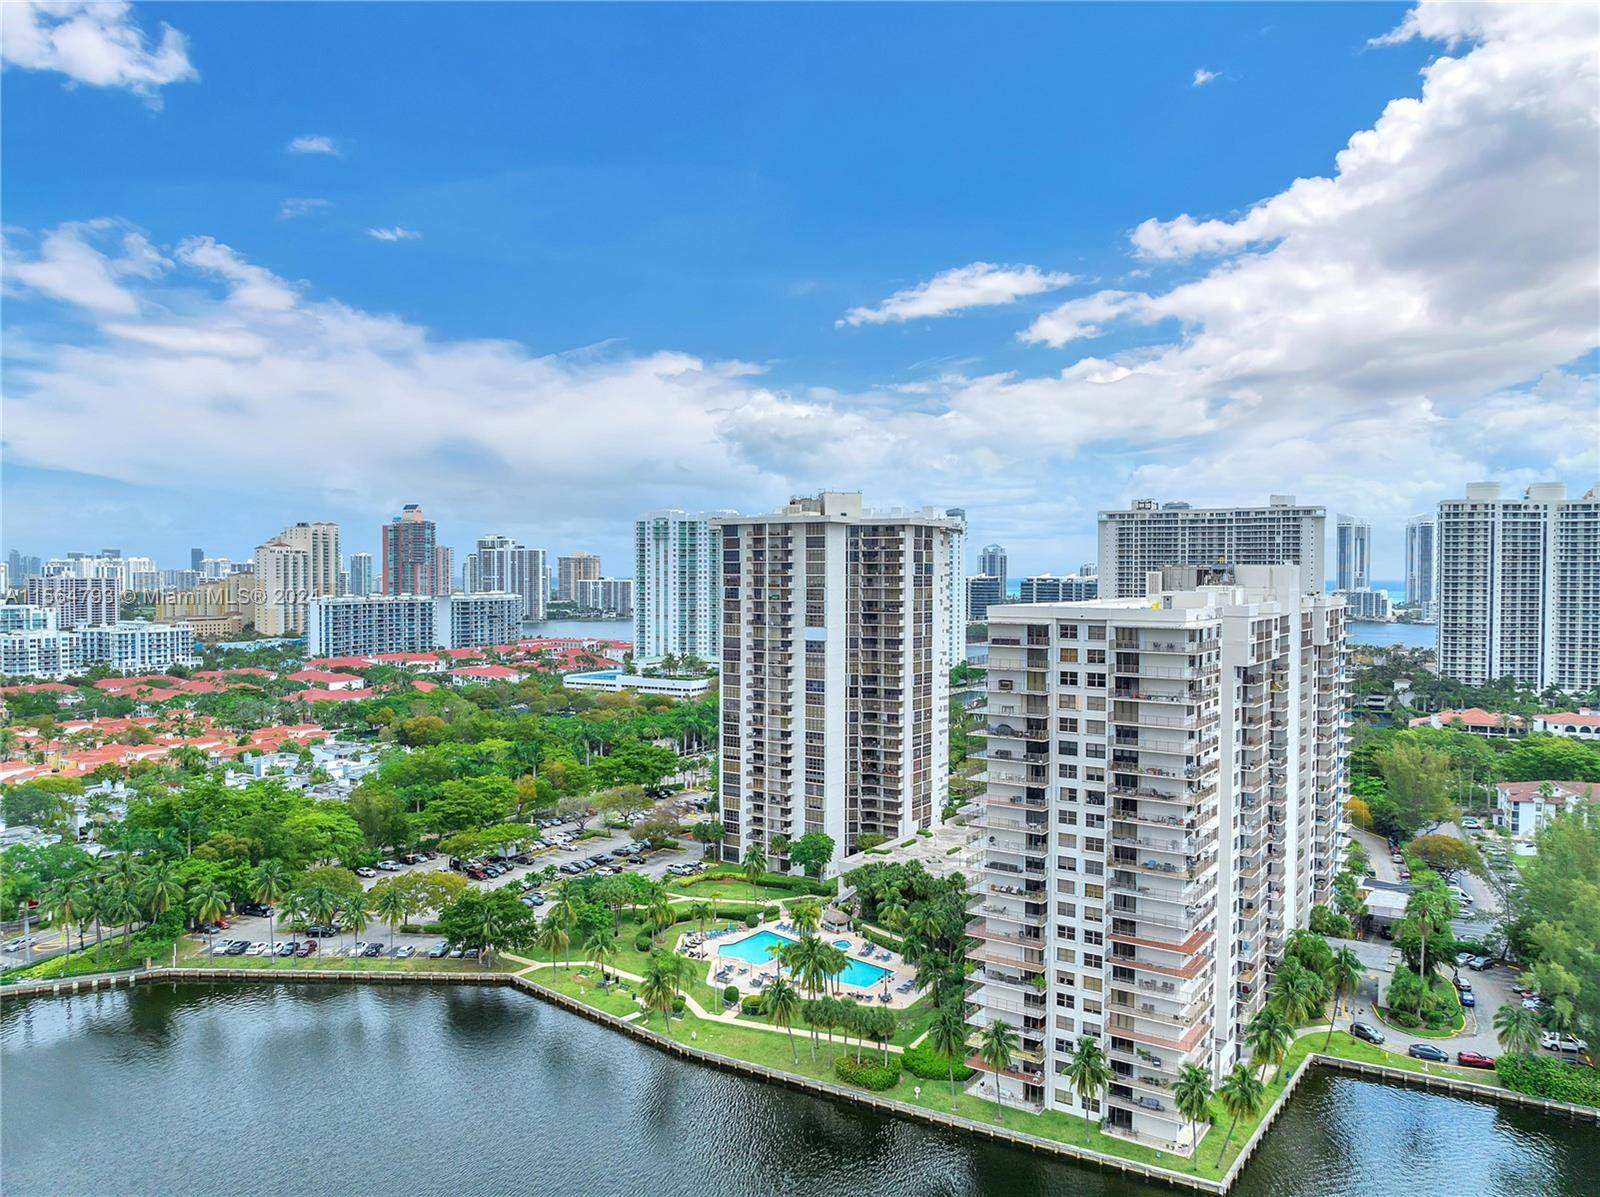 BEST LUXURY FINISHING IN AVENTURA Biscayne Cove Condo offers an exquisite selection of luxury apartments in aventura, boasting brand new interior finishing starting from 458, 000.